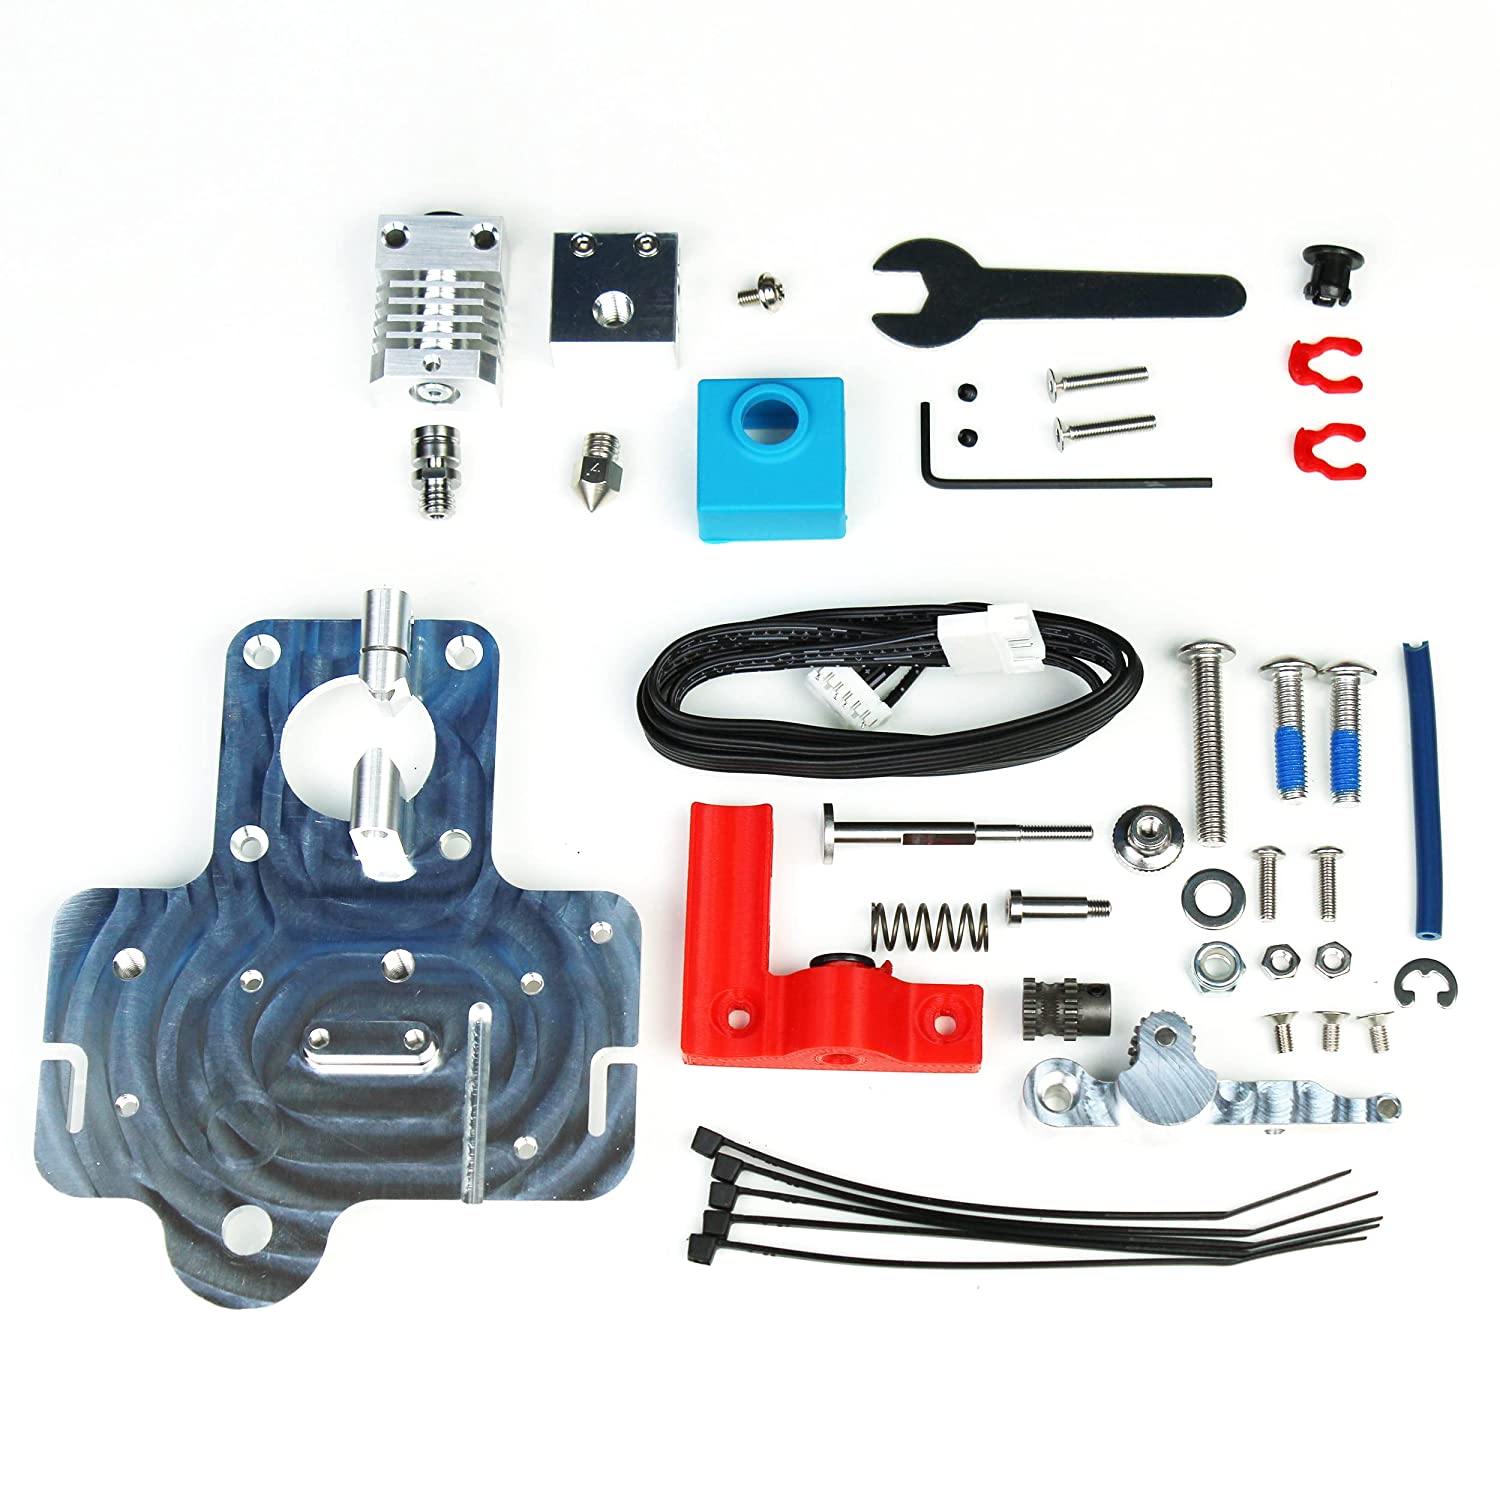 Micro Swiss Direct Drive Extruder + All Metal Hotend for Creality Ender 5/Pro/Plus 3D Printer